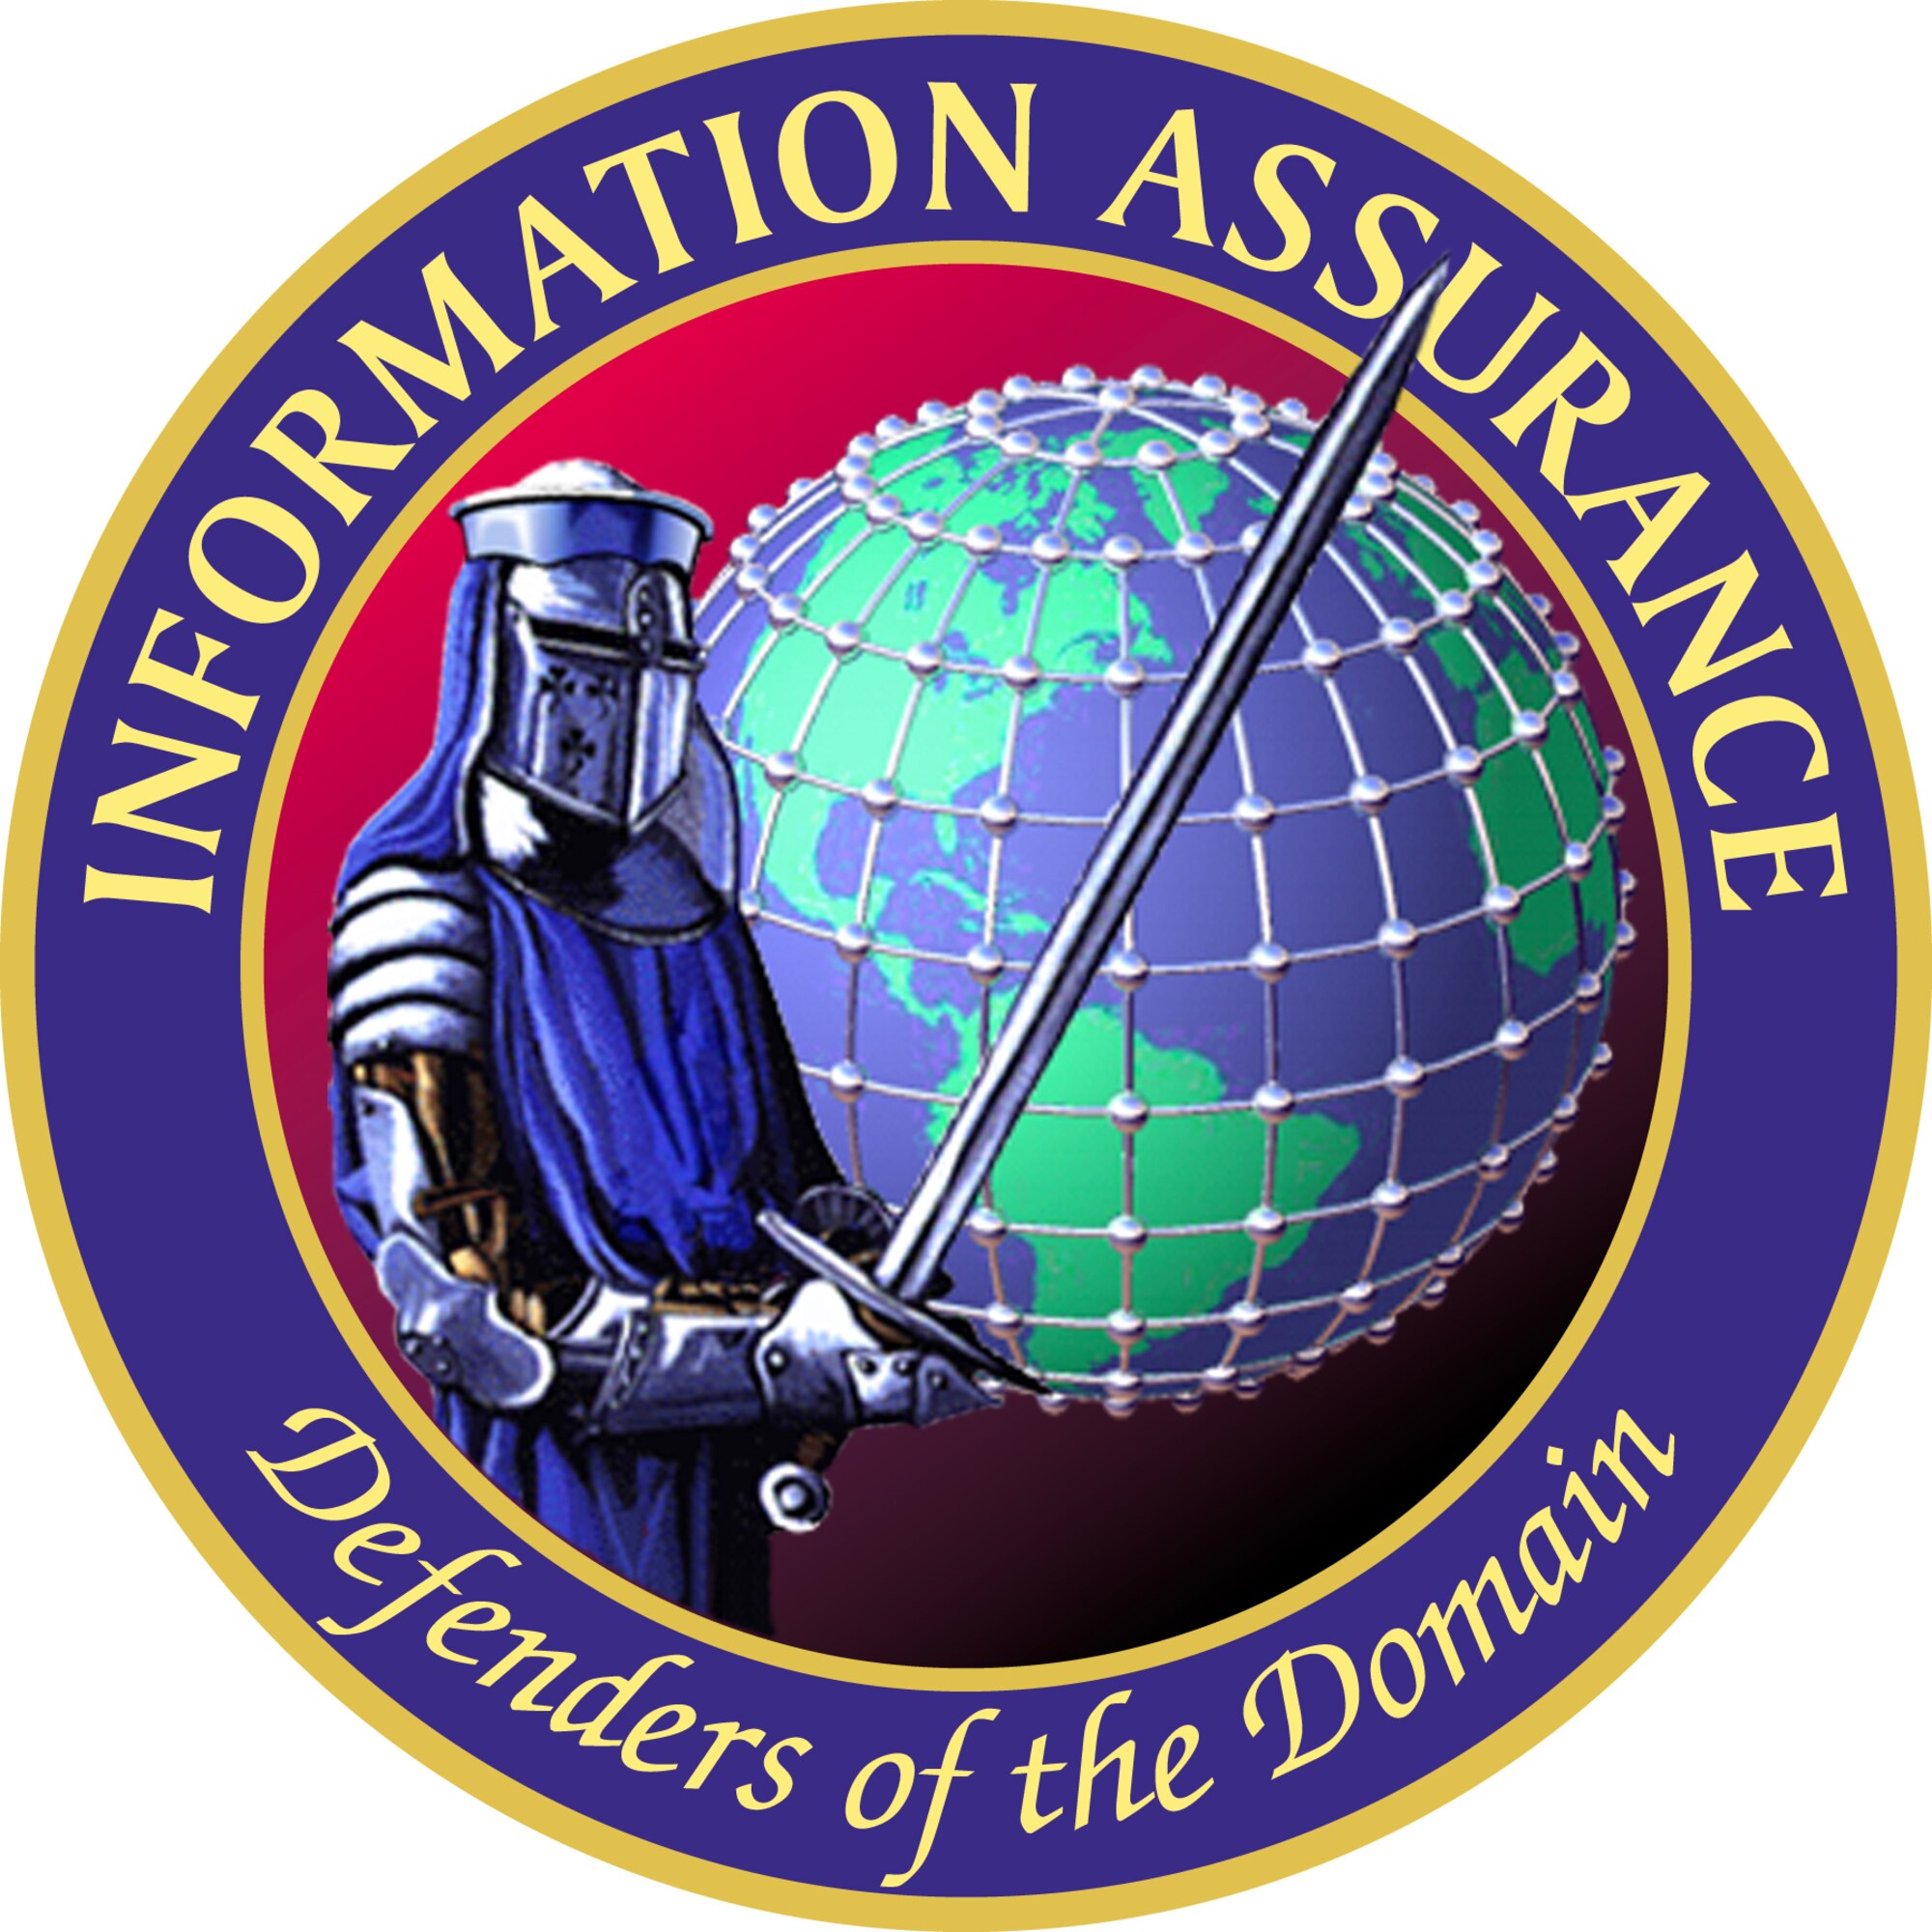 The U.S. Cyber Command will conduct the 48th Fighter Wing's Command Cyber Readiness Inspection Sept. 23 to 27. This inspection is a detailed review of our base's Information Assurance programs, all aspects of the unclassified and classified networks, as well as analysis and scoring of critical cyber and physical assets that support these networks.
